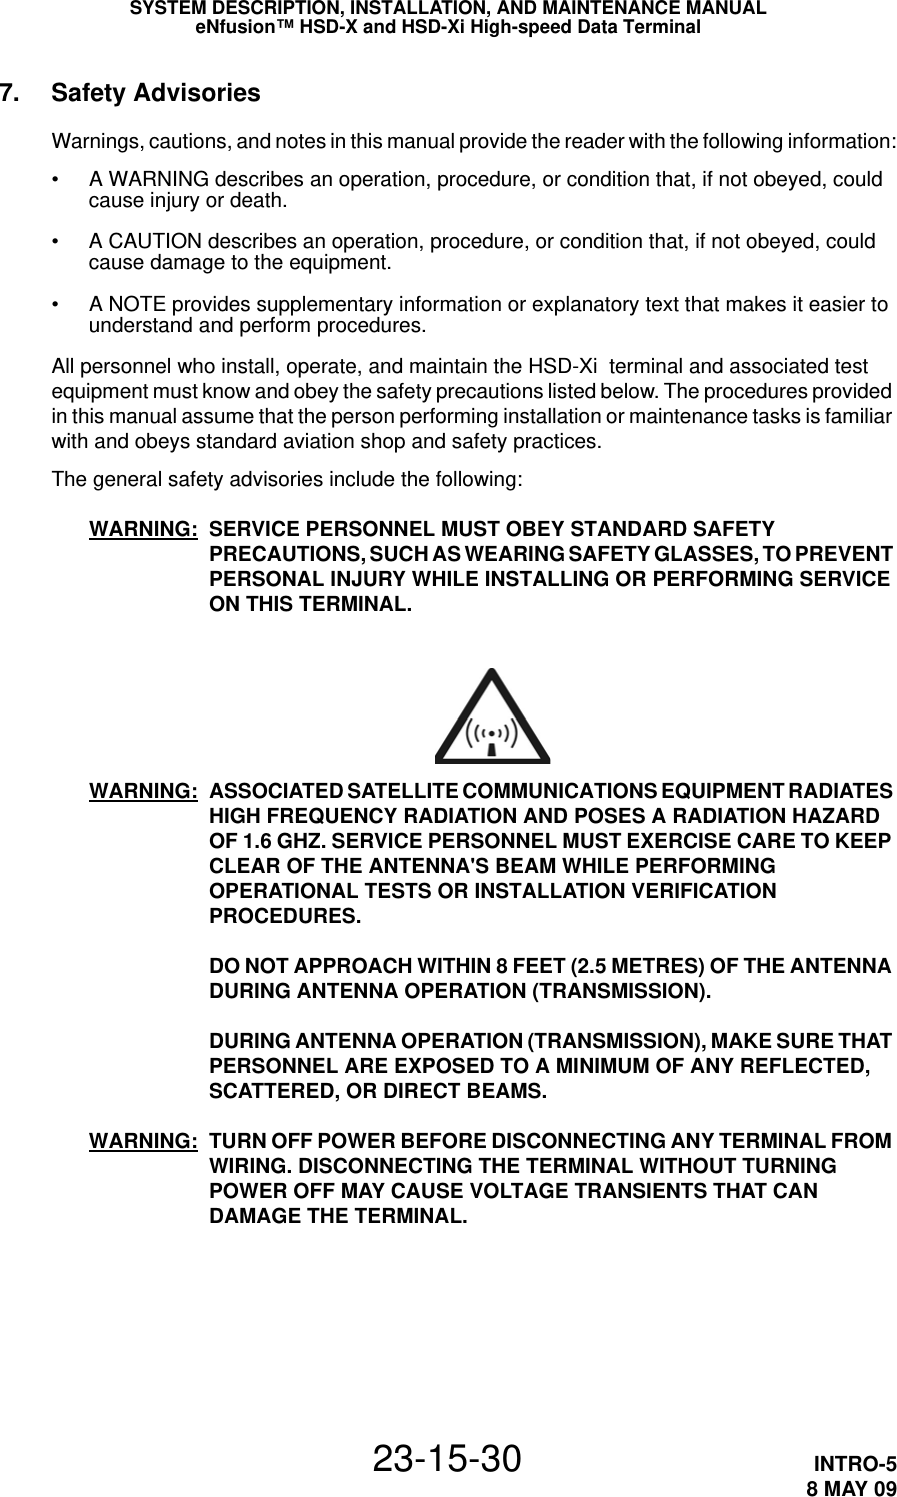 SYSTEM DESCRIPTION, INSTALLATION, AND MAINTENANCE MANUALeNfusion™ HSD-X and HSD-Xi High-speed Data Terminal23-15-30 INTRO-58 MAY 097. Safety AdvisoriesWarnings, cautions, and notes in this manual provide the reader with the following information:• A WARNING describes an operation, procedure, or condition that, if not obeyed, could cause injury or death.• A CAUTION describes an operation, procedure, or condition that, if not obeyed, could cause damage to the equipment.• A NOTE provides supplementary information or explanatory text that makes it easier to understand and perform procedures.All personnel who install, operate, and maintain the HSD-Xi  terminal and associated test equipment must know and obey the safety precautions listed below. The procedures provided in this manual assume that the person performing installation or maintenance tasks is familiar with and obeys standard aviation shop and safety practices.The general safety advisories include the following:WARNING: SERVICE PERSONNEL MUST OBEY STANDARD SAFETY PRECAUTIONS, SUCH AS WEARING SAFETY GLASSES, TO PREVENT PERSONAL INJURY WHILE INSTALLING OR PERFORMING SERVICE ON THIS TERMINAL.WARNING: ASSOCIATED SATELLITE COMMUNICATIONS EQUIPMENT RADIATES HIGH FREQUENCY RADIATION AND POSES A RADIATION HAZARD OF 1.6 GHZ. SERVICE PERSONNEL MUST EXERCISE CARE TO KEEP CLEAR OF THE ANTENNA&apos;S BEAM WHILE PERFORMING OPERATIONAL TESTS OR INSTALLATION VERIFICATION PROCEDURES. DO NOT APPROACH WITHIN 8 FEET (2.5 METRES) OF THE ANTENNA DURING ANTENNA OPERATION (TRANSMISSION). DURING ANTENNA OPERATION (TRANSMISSION), MAKE SURE THAT PERSONNEL ARE EXPOSED TO A MINIMUM OF ANY REFLECTED, SCATTERED, OR DIRECT BEAMS.WARNING: TURN OFF POWER BEFORE DISCONNECTING ANY TERMINAL FROM WIRING. DISCONNECTING THE TERMINAL WITHOUT TURNING POWER OFF MAY CAUSE VOLTAGE TRANSIENTS THAT CAN DAMAGE THE TERMINAL.